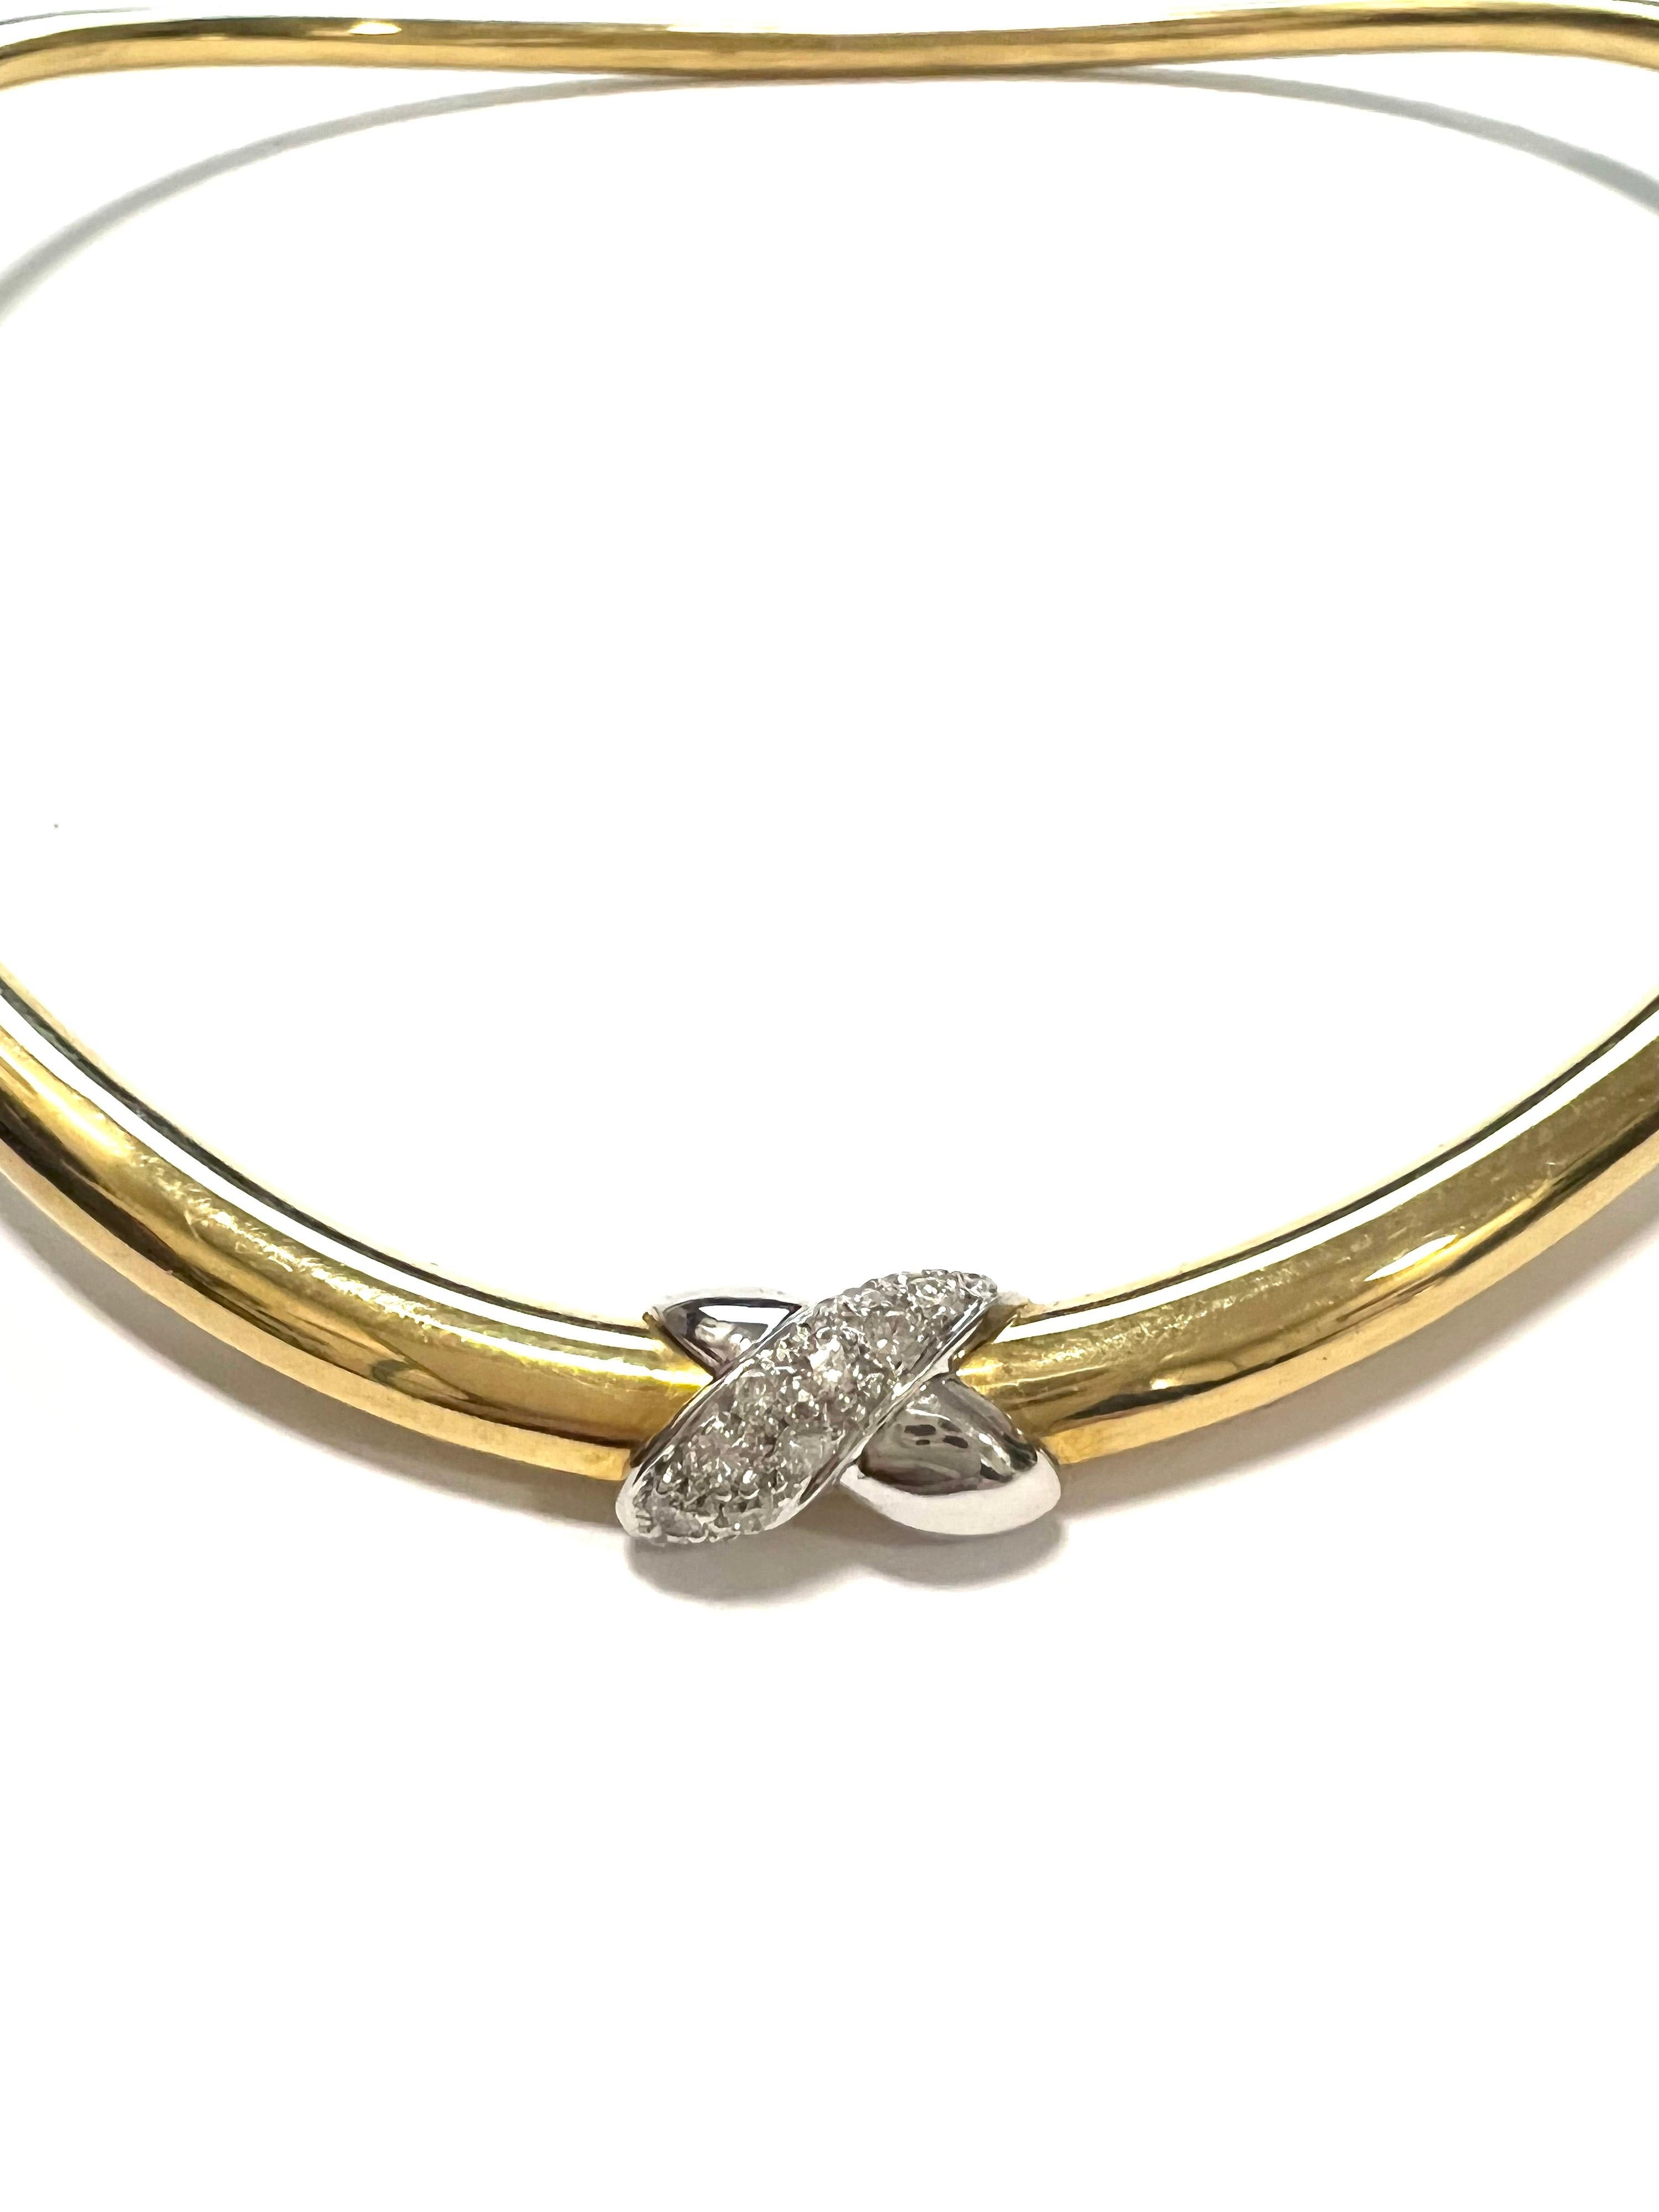 Rigid chocker in 18 kt yellow gold embellished with white gold detail and white diamonds
The diameter of the necklace is 12x12.5 cm
The total weight of the gold is GR 31.10
The total weight of diamonds is ct 0.40
Stamp 10 MI 750

